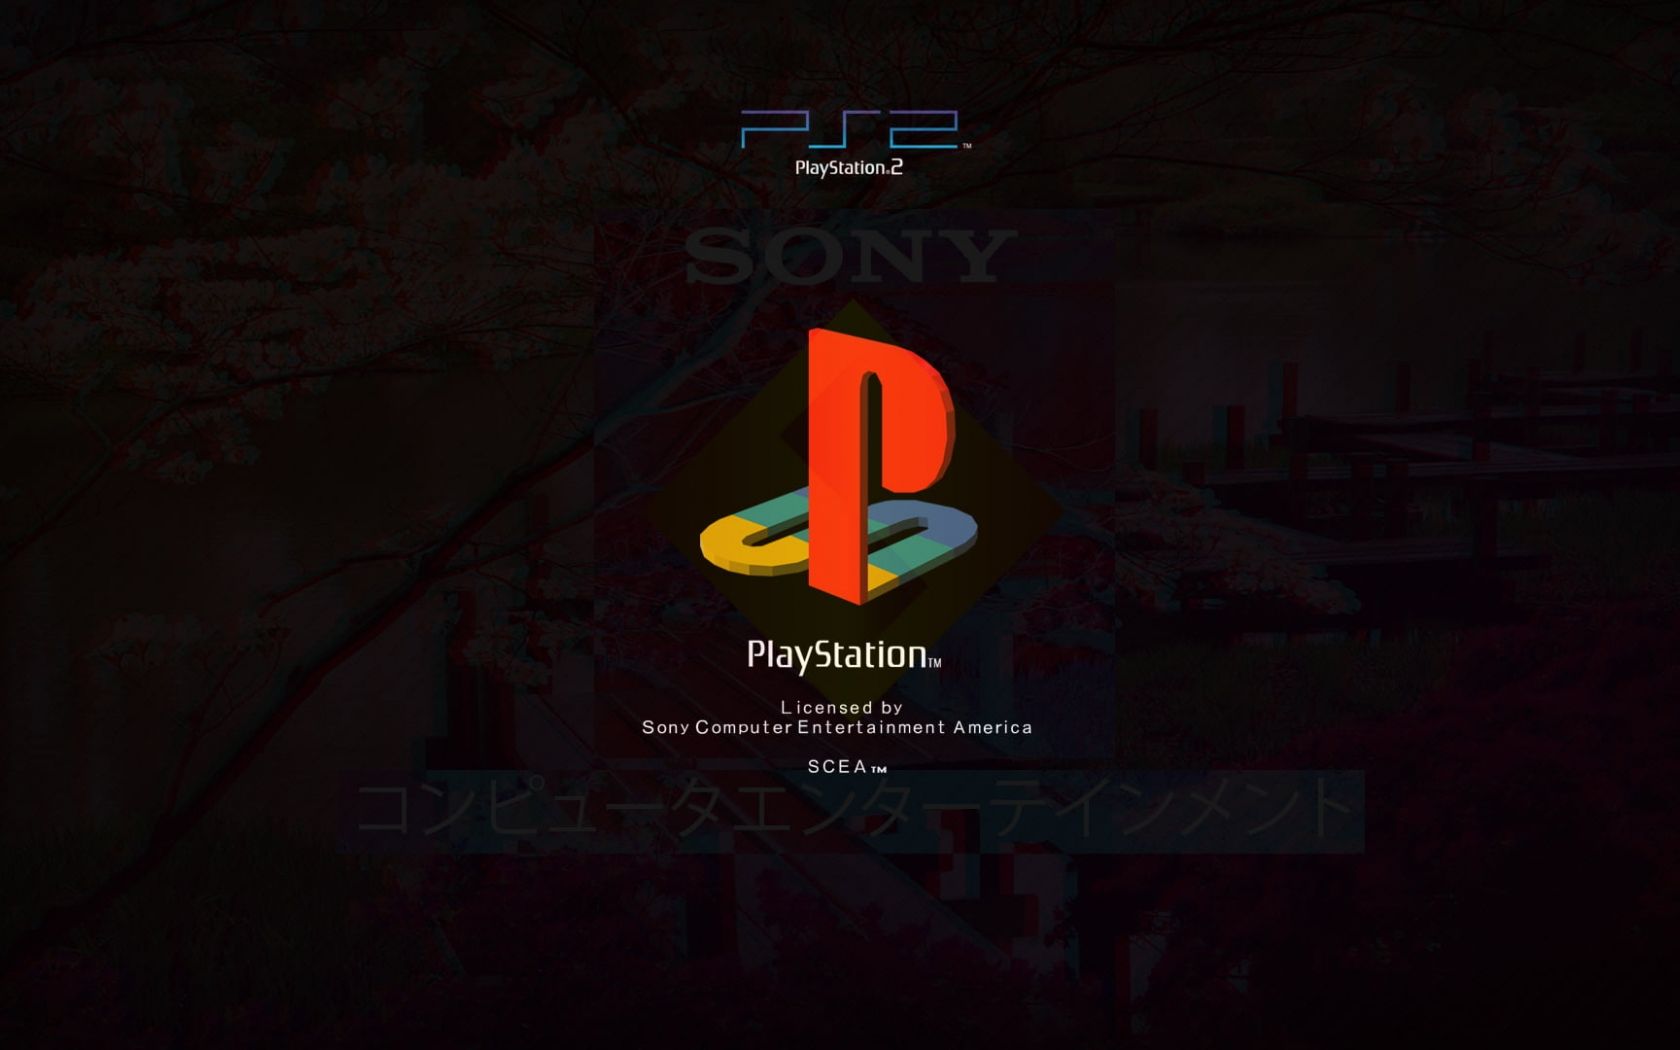 Free download PlayStation logo Play Station Play Station 2 Sony